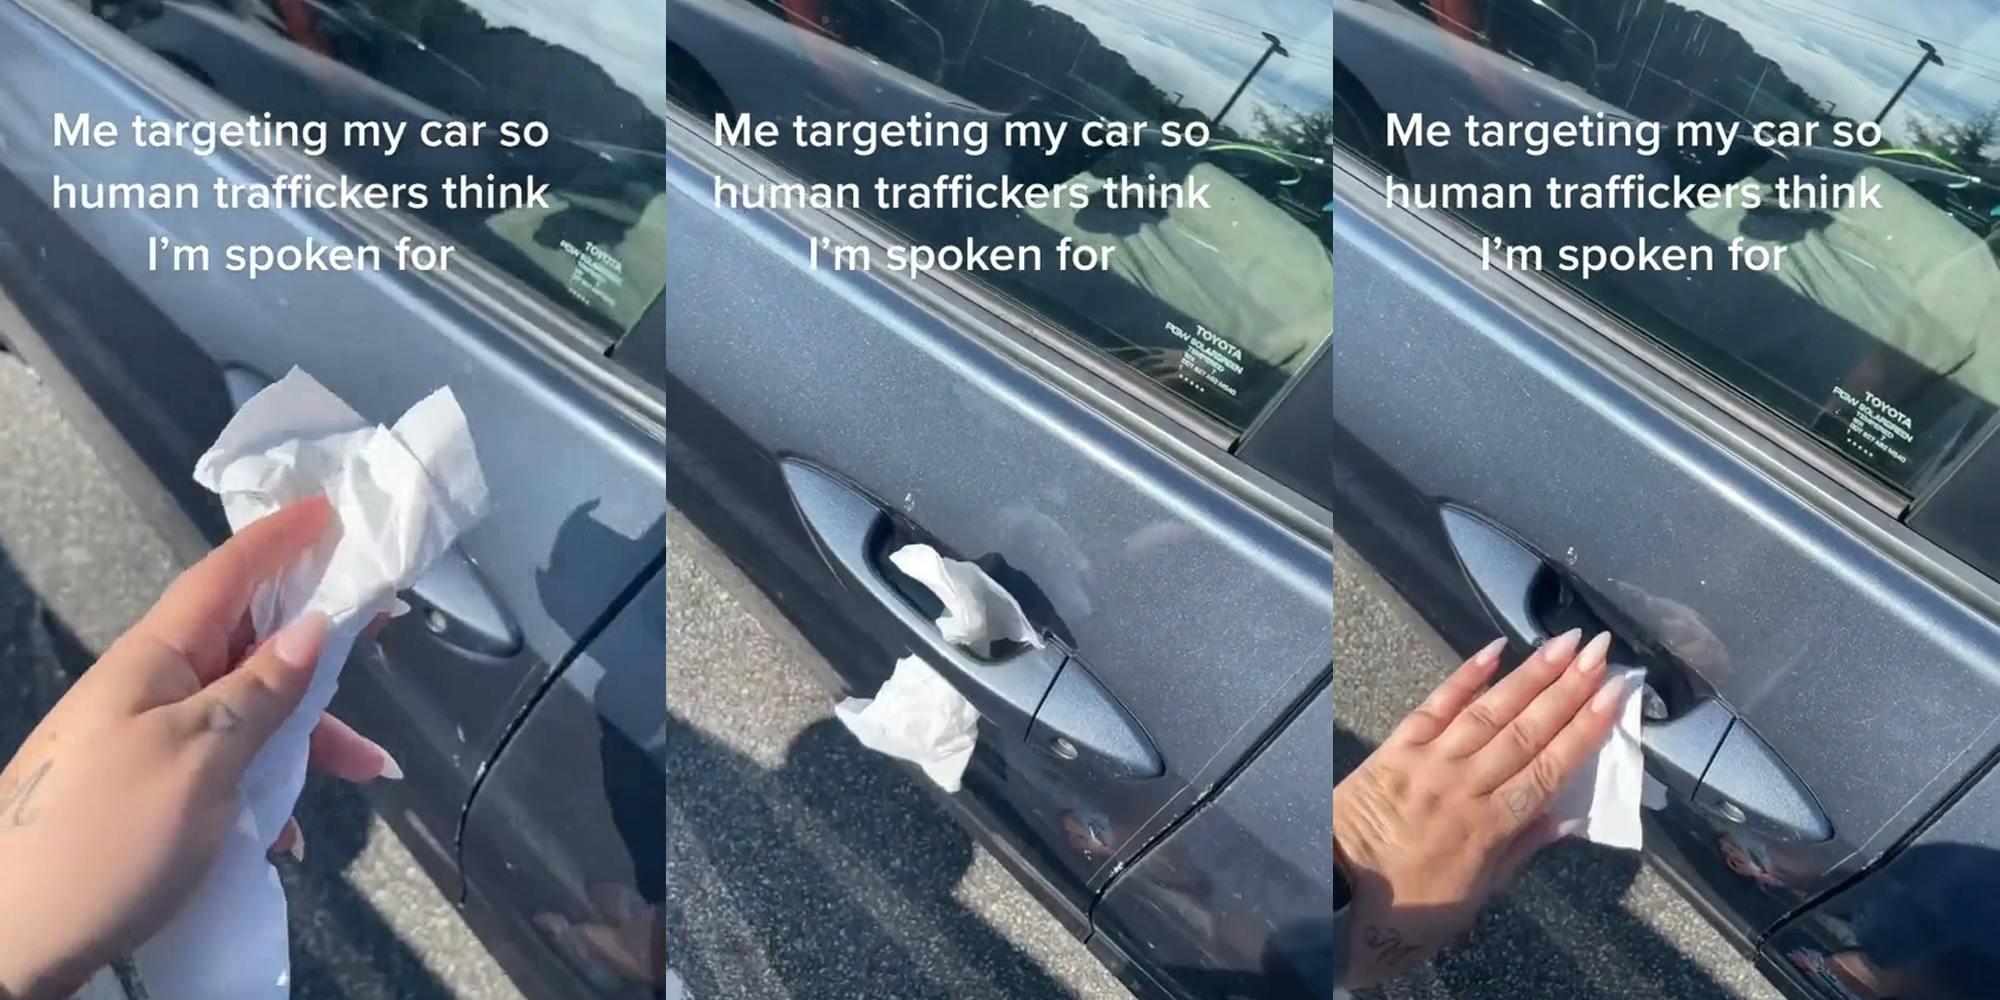 woman holding napkin next to car door handle with caption "Me targeting my car so human traffickers think I'm spoken for" (l) napkin in car door handle with caption "Me targeting my car so human traffickers think I'm spoken for" (c) woman placing napkin next to car door handle with caption "Me targeting my car so human traffickers think I'm spoken for" (r)